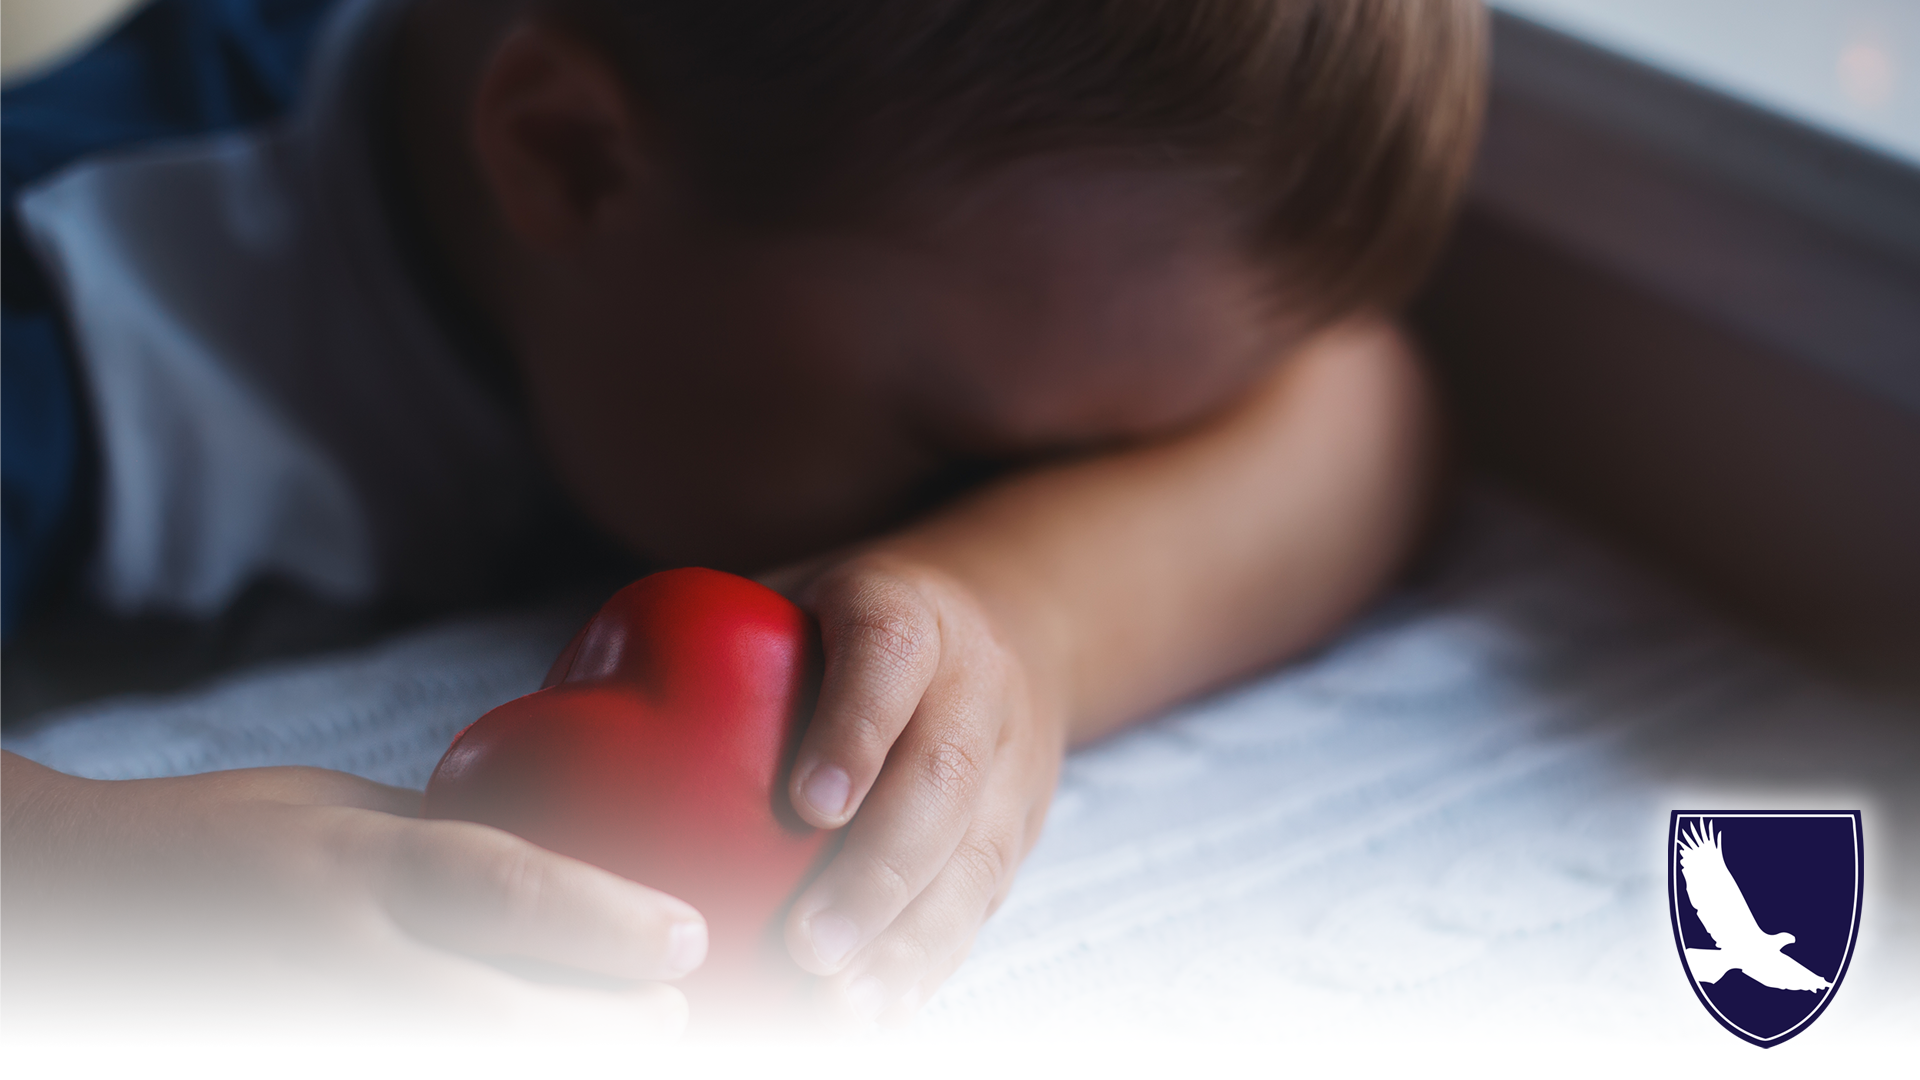 Child facedown on arm holding heart shaped stress ball